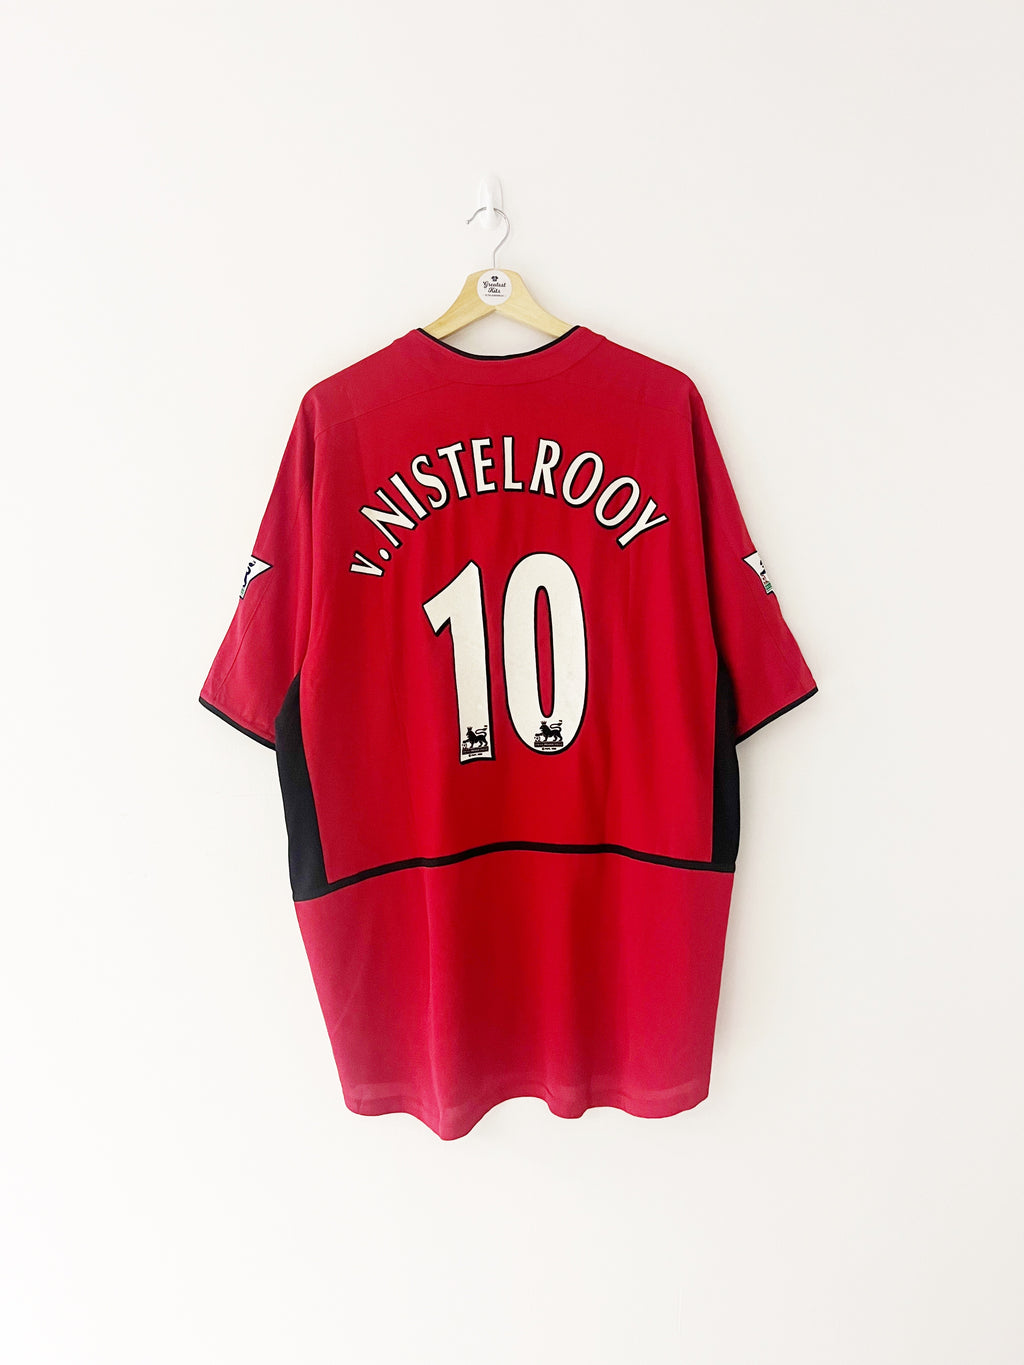 2002/04 Manchester United Home Shirt v.Nistelrooy #10 (XL) 9/10